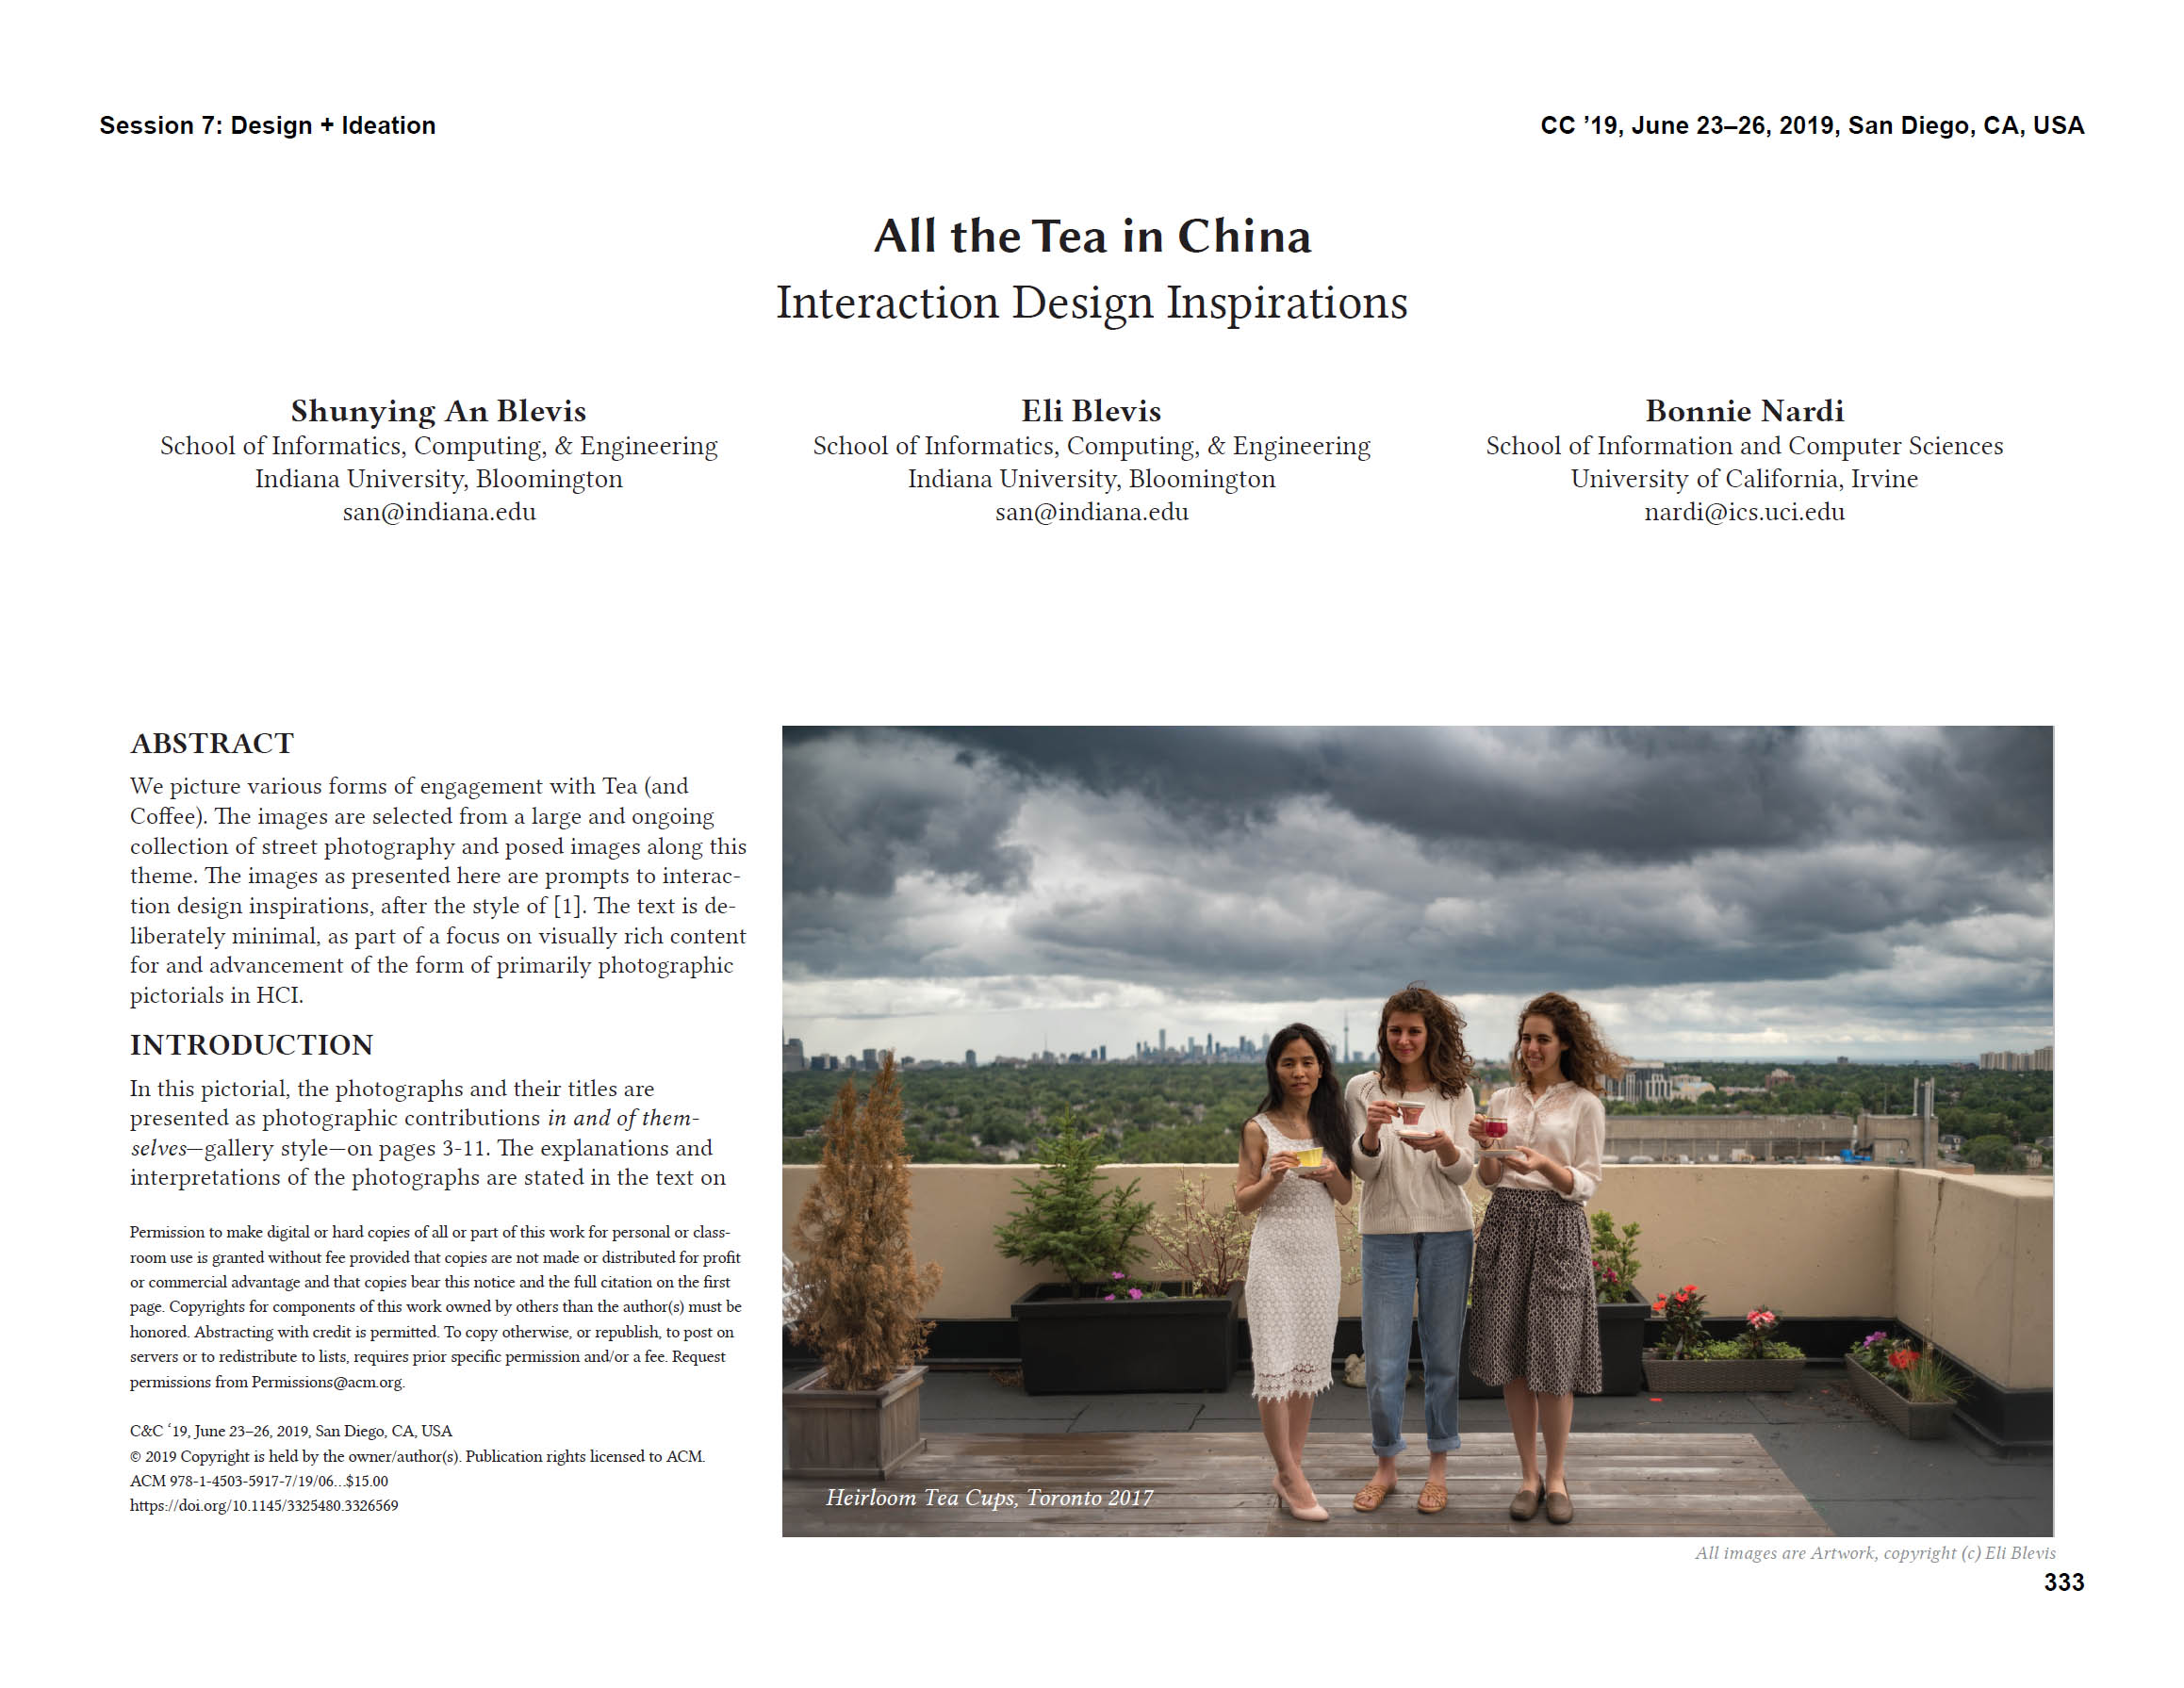 ctorial: All the Tea in China: Interaction Design Inspirations